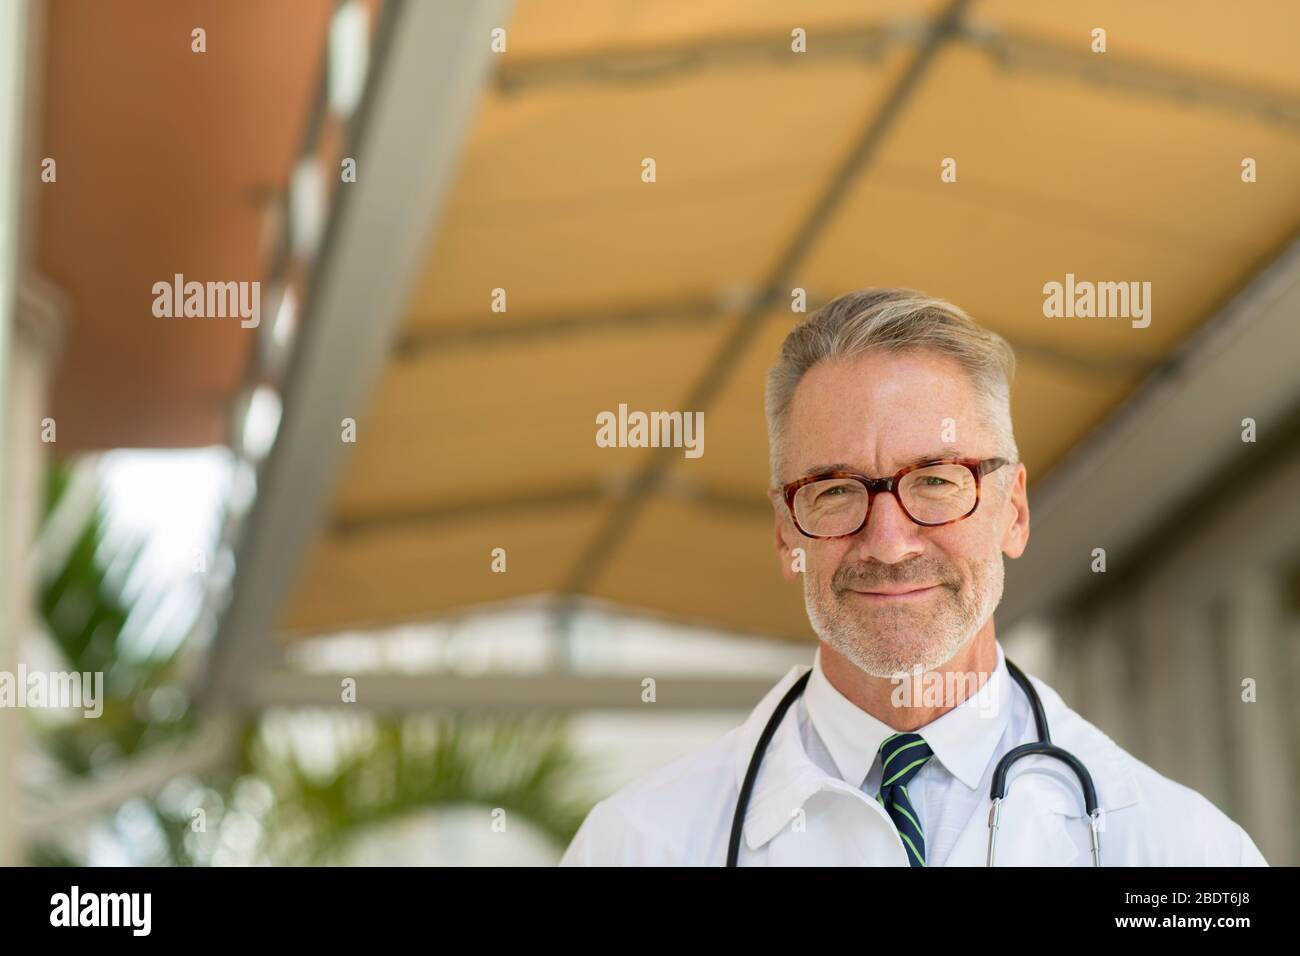 Portrait of a mature handsome doctor at a medical office. Stock Photo